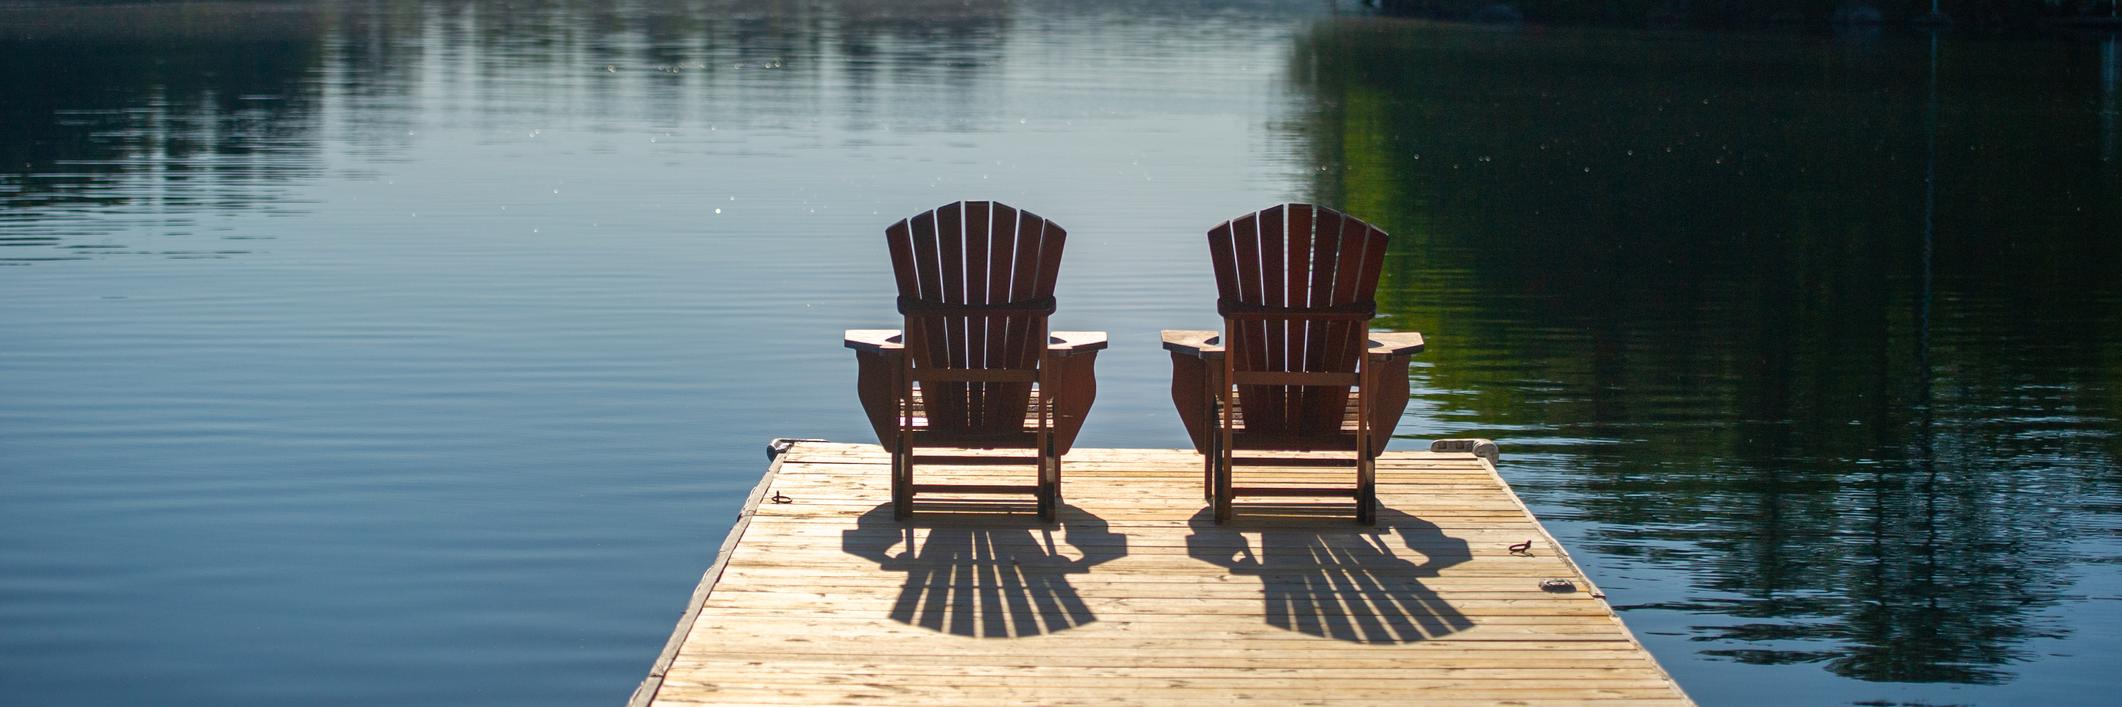 Two Muskoka chairs sitting on a pier over a lake in summertime